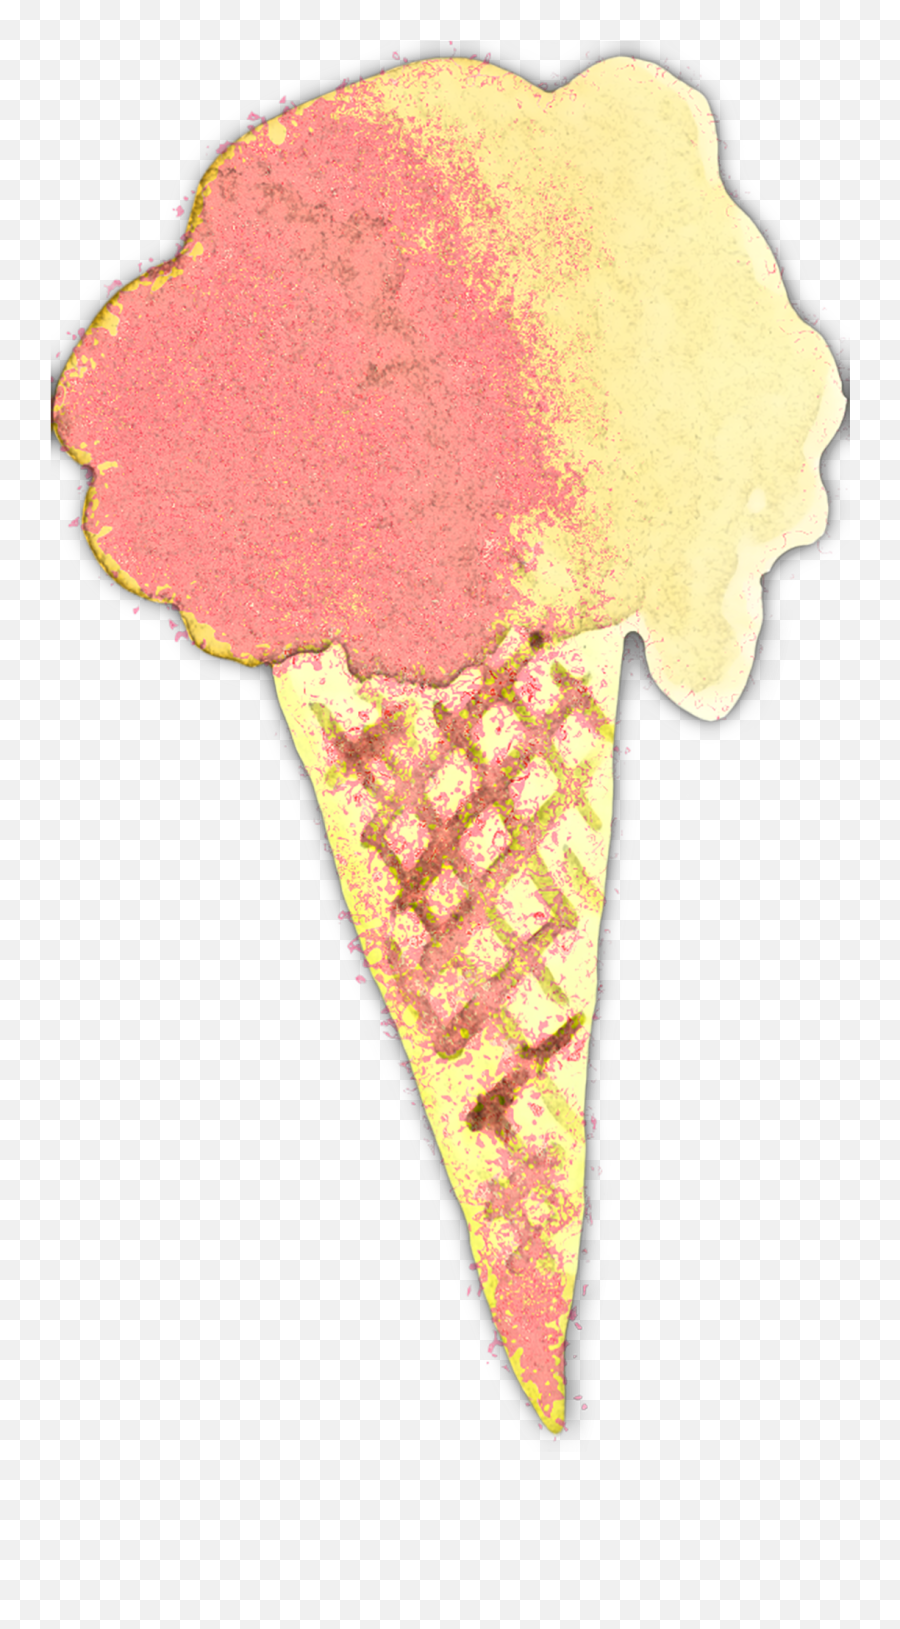 Abstract Ice Cream Cone Png Free Stock Photo - Public Domain Ice Cream Cone,Ice Cream Png